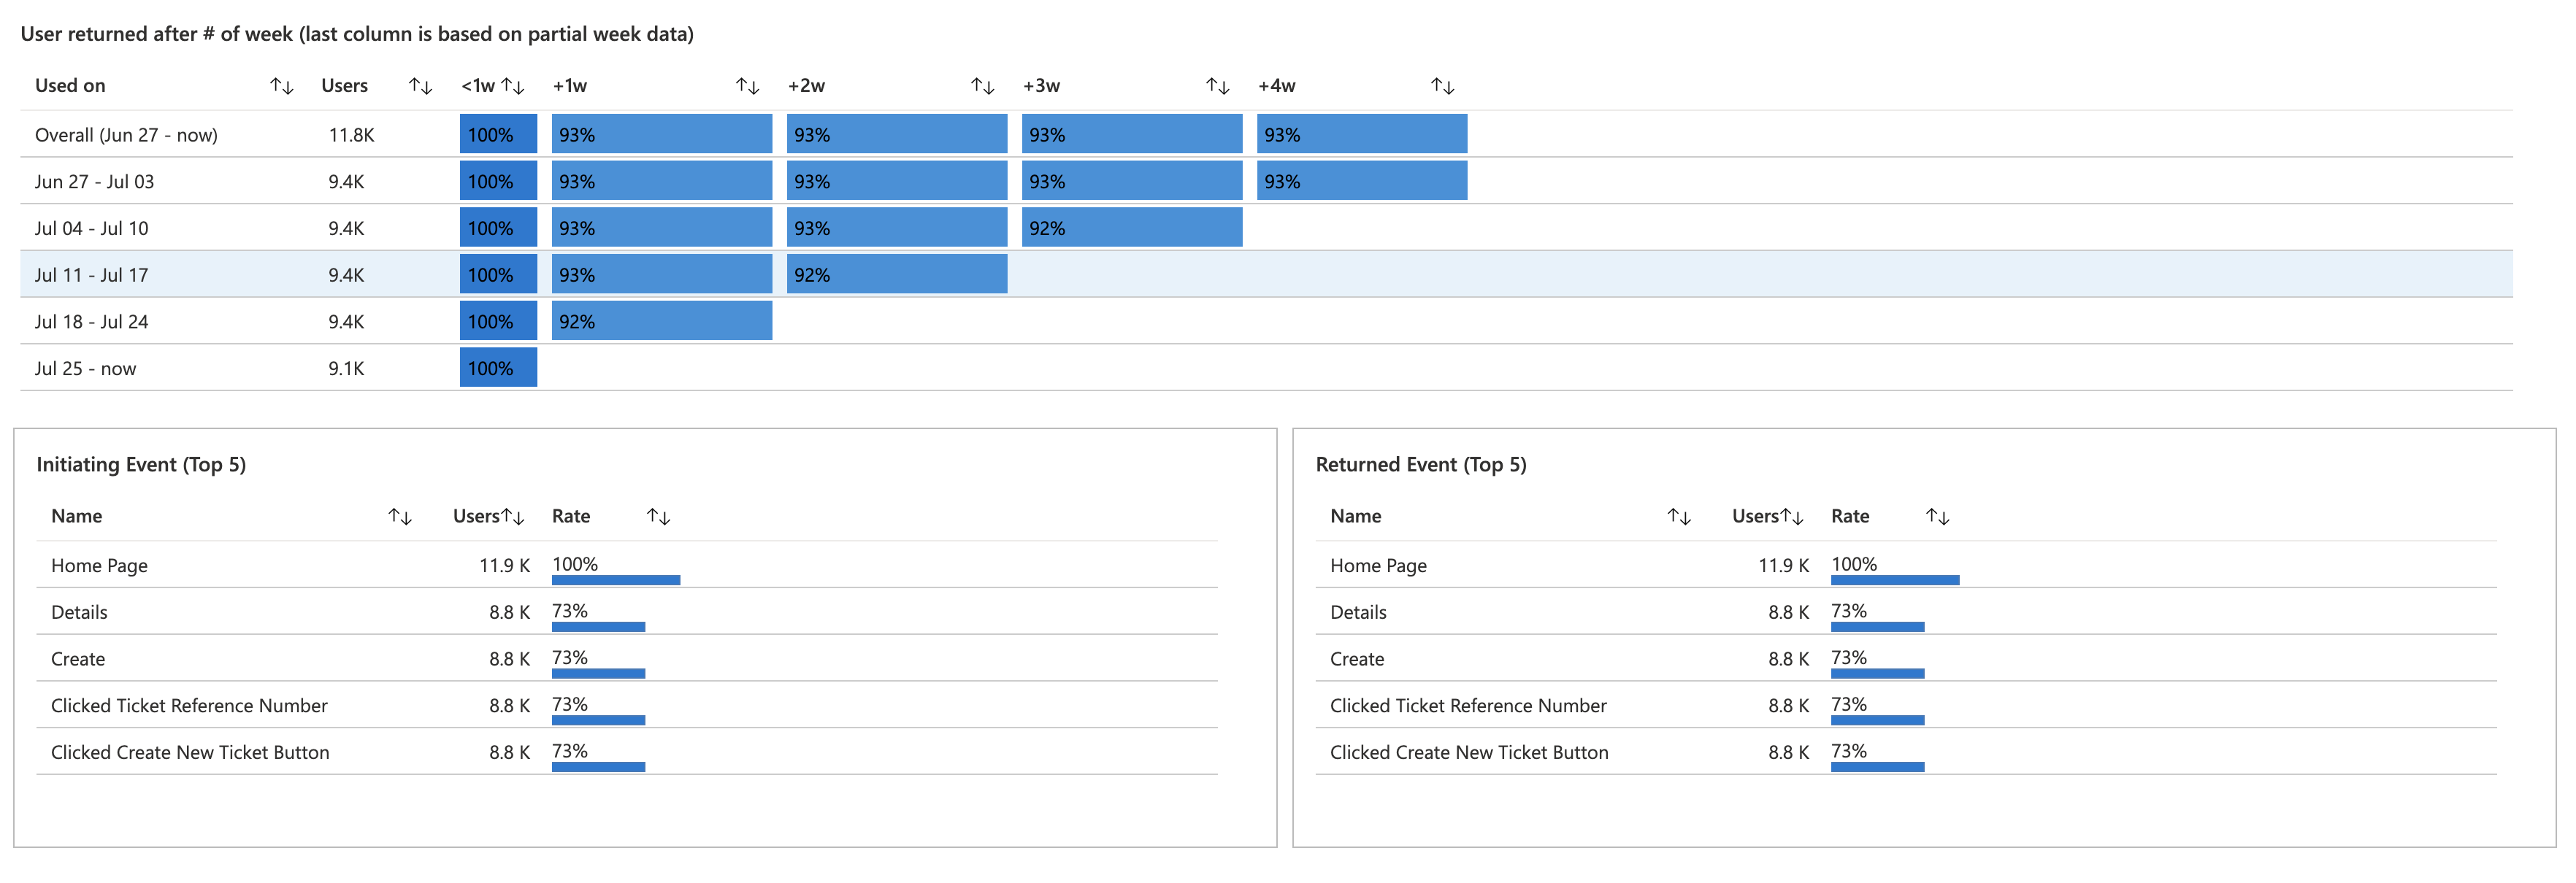 Screenshot of the retention workbook, showing user return after # of weeks chart.